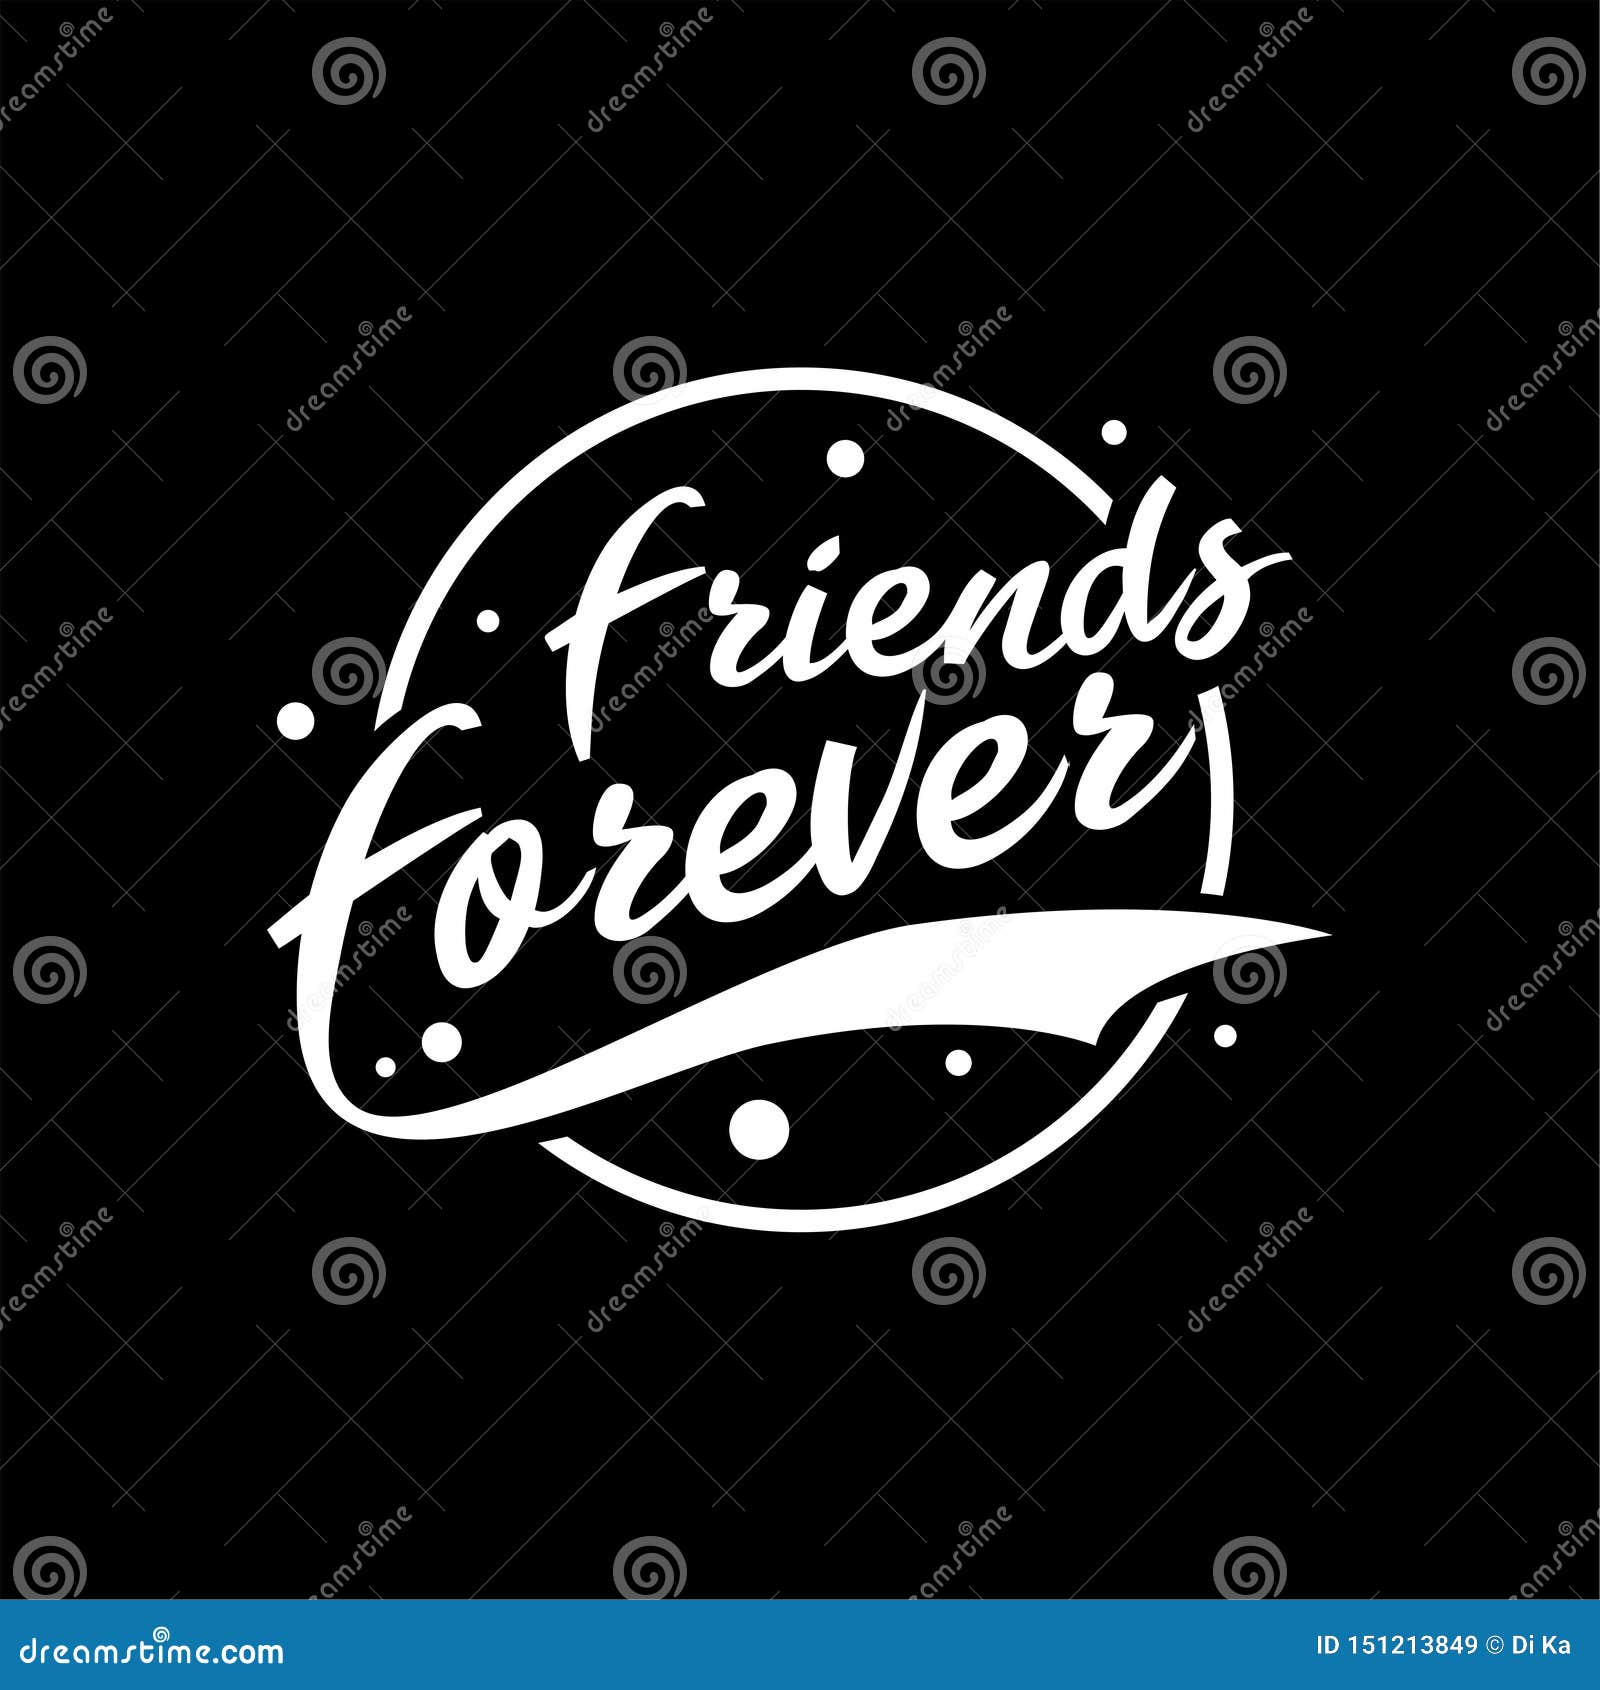 Friends forever logo design, Happy Friendship Day label for banner, poster,  greeting card, t-shirt vector Illustration - Stock Image - Everypixel